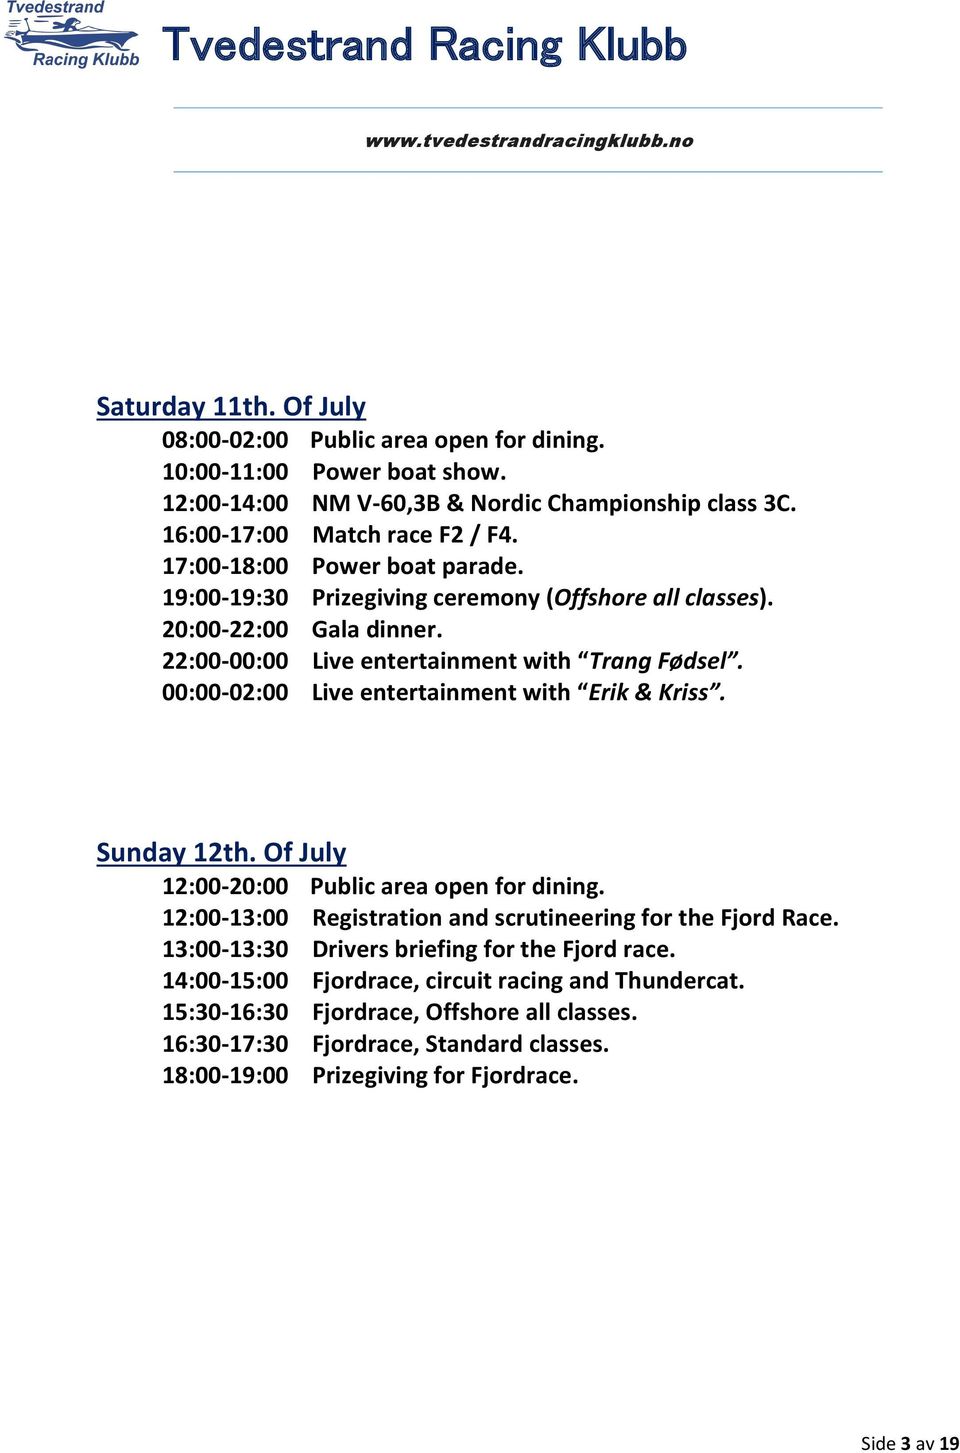 00:00-02:00 Live entertainment with Erik & Kriss. Sunday 12th. Of July 12:00-20:00 Public area open for dining. 12:00-13:00 Registration and scrutineering for the Fjord Race.